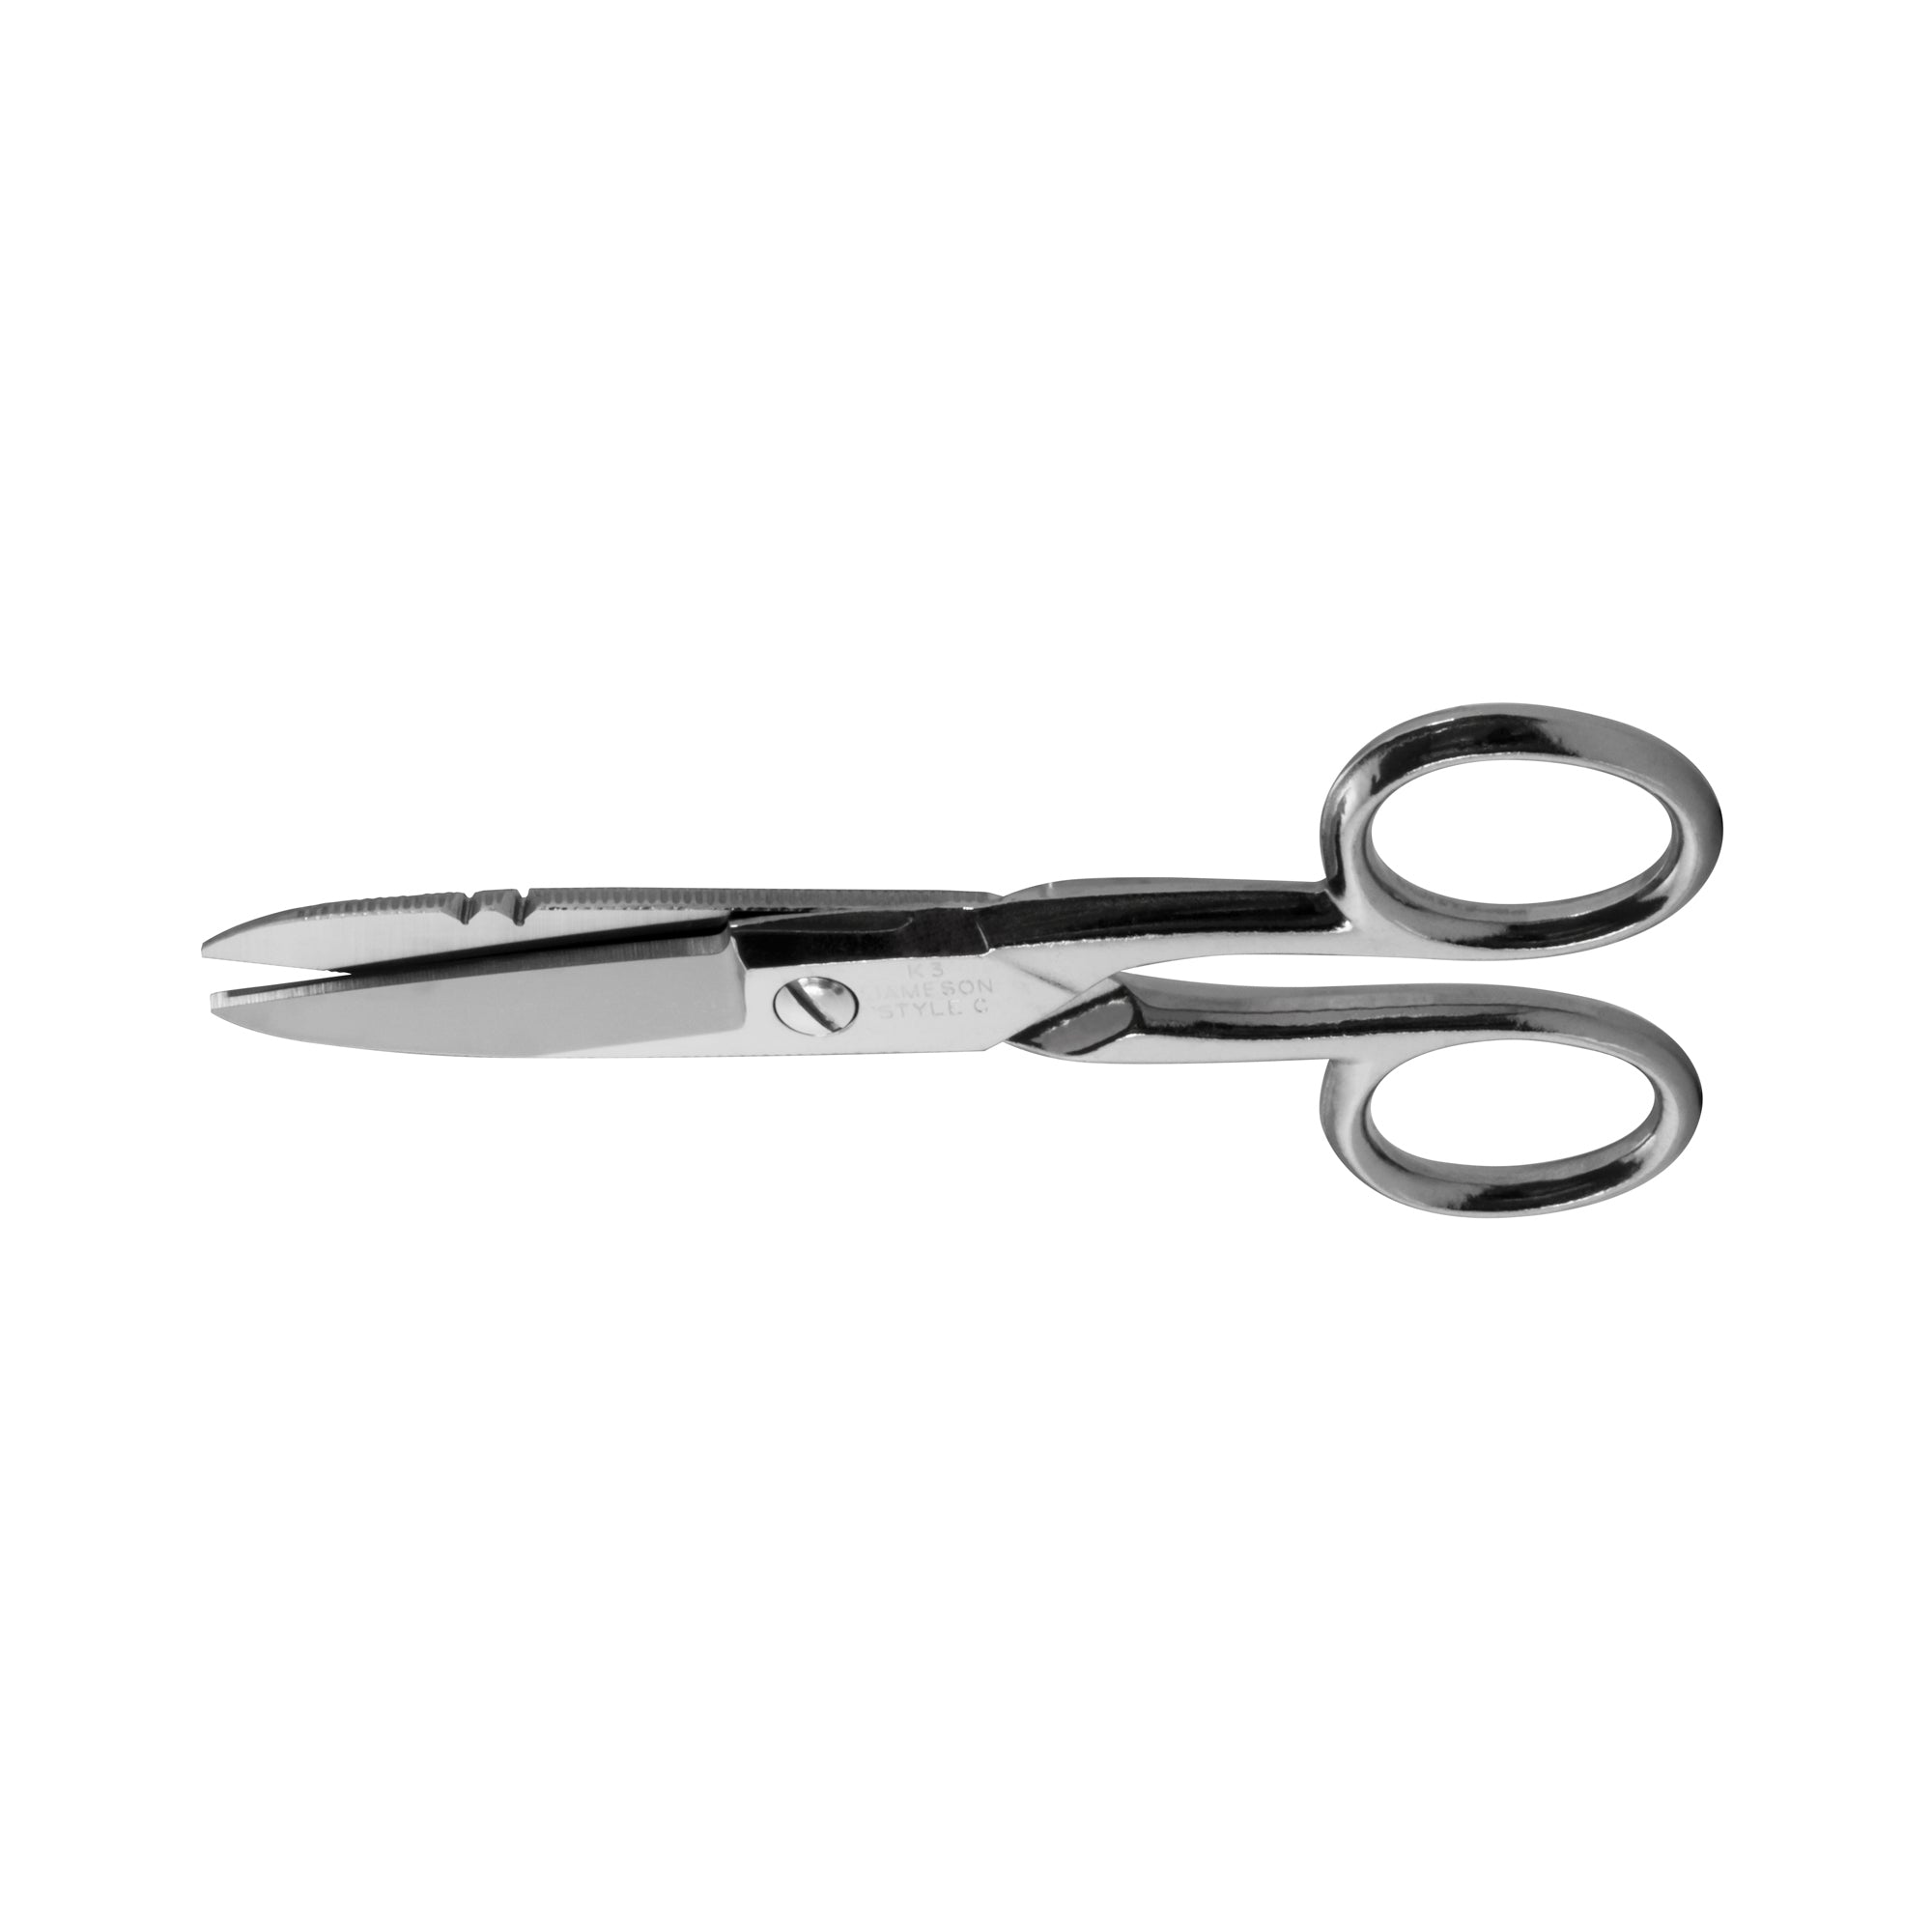 Multi Purpose Electrician Red Scissors 5.25 Cutting Stripping Wires  Electrical Repair Stainless Steel Instruments